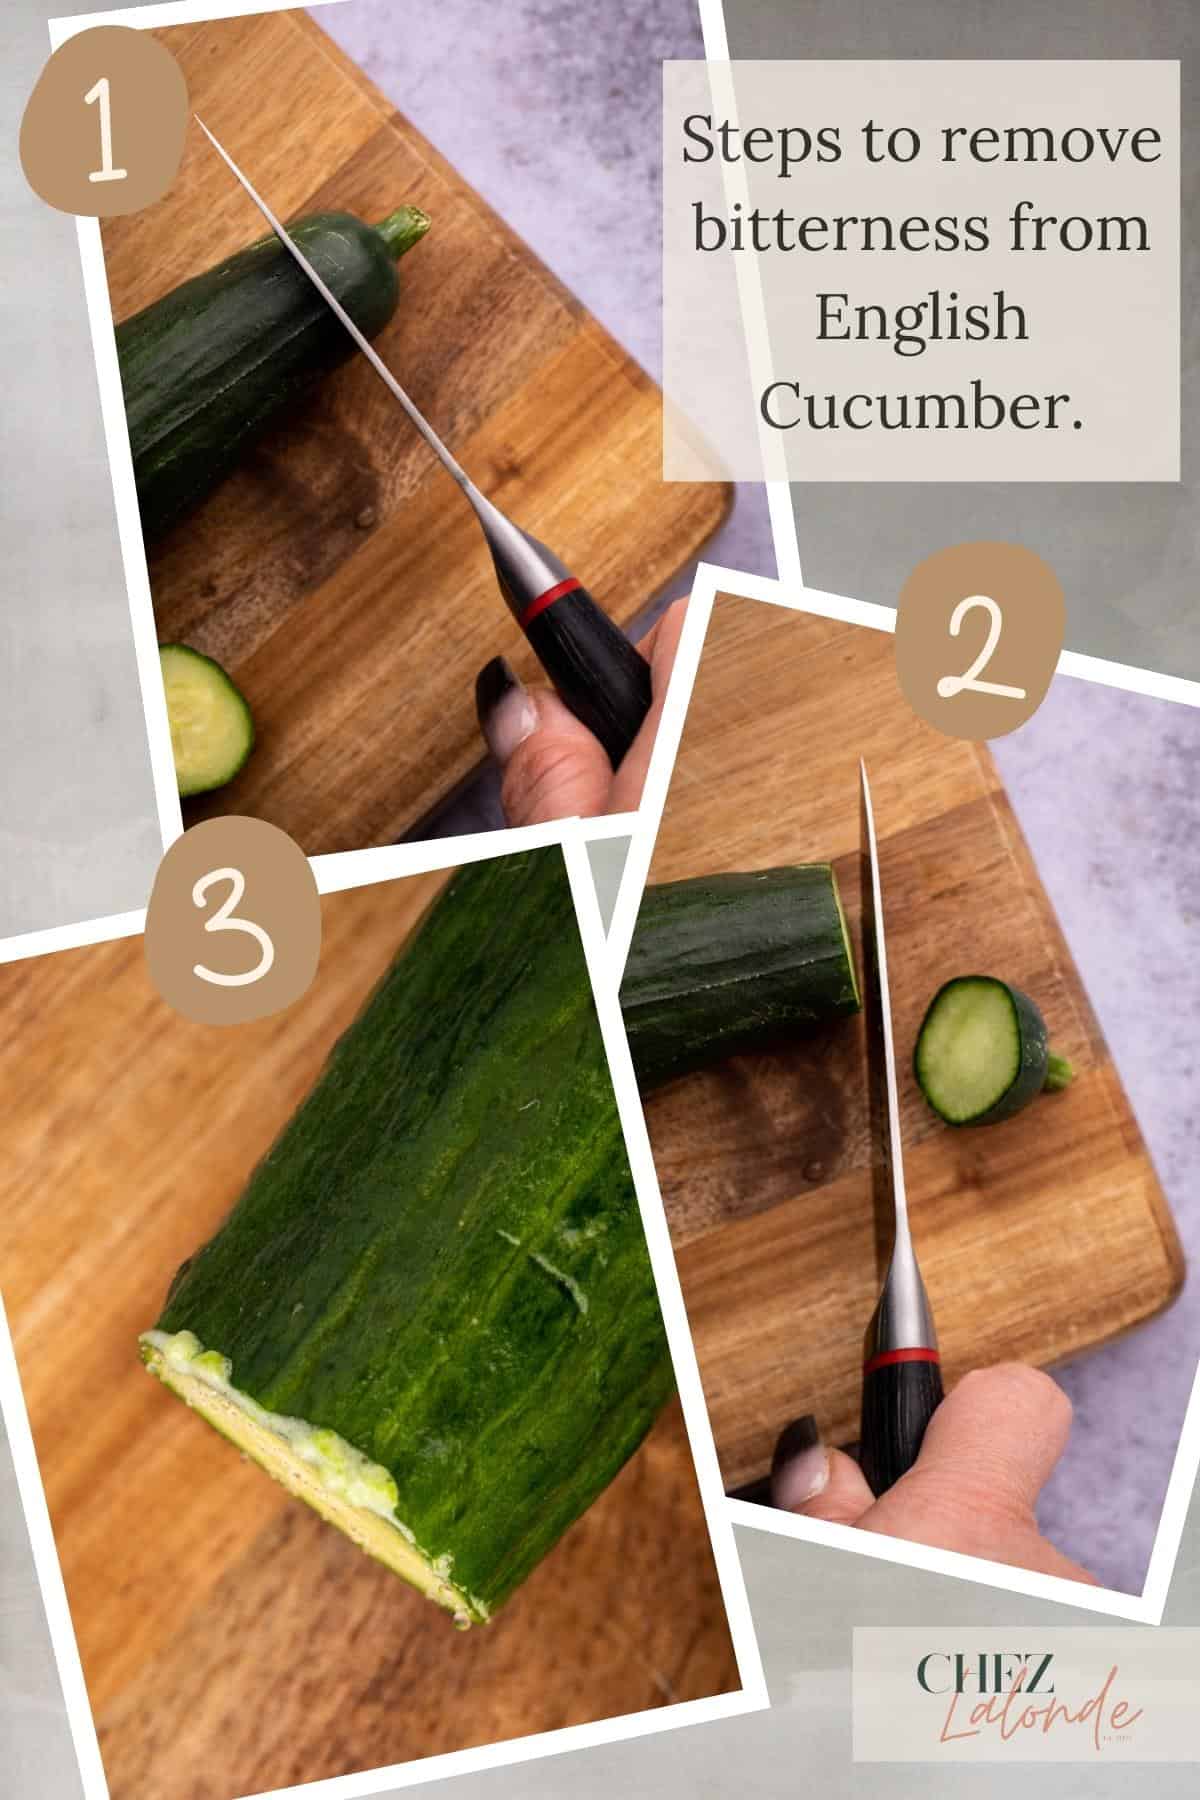 3 steps photo on showing how to remove bitterness from English cucumbers. 